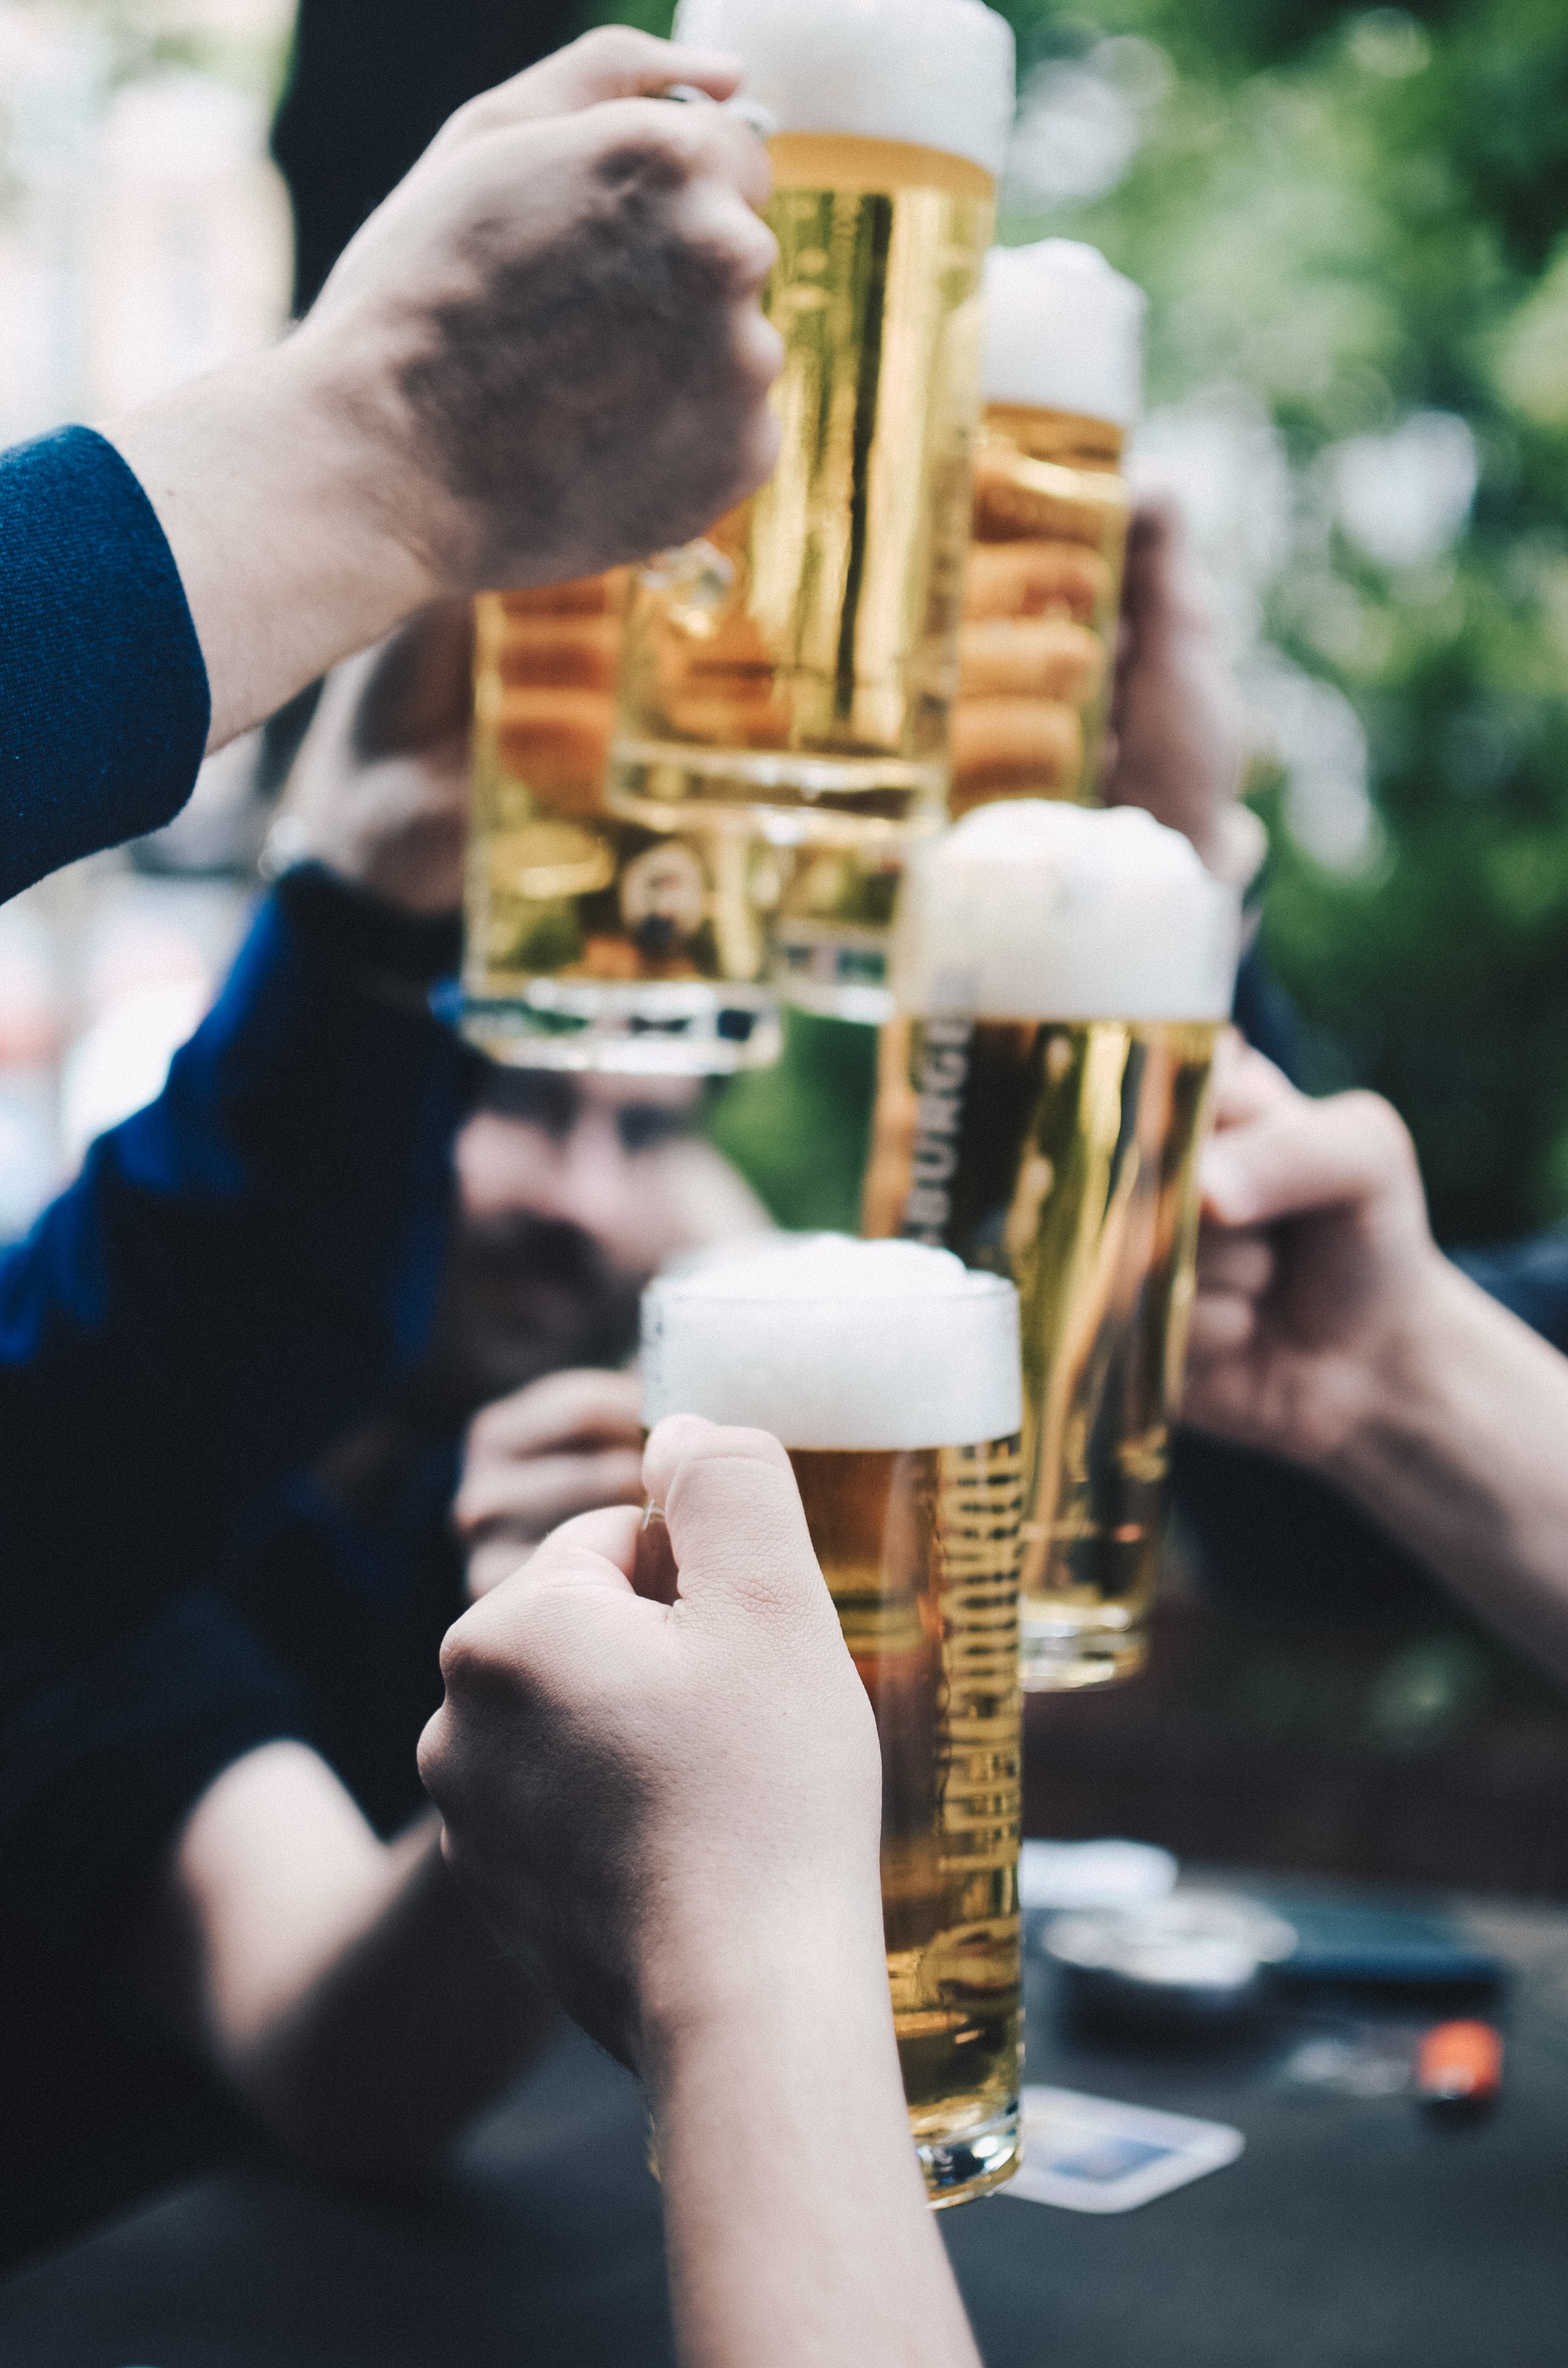 5 Common Beer Myths You Need to Stop Believing – What to Know